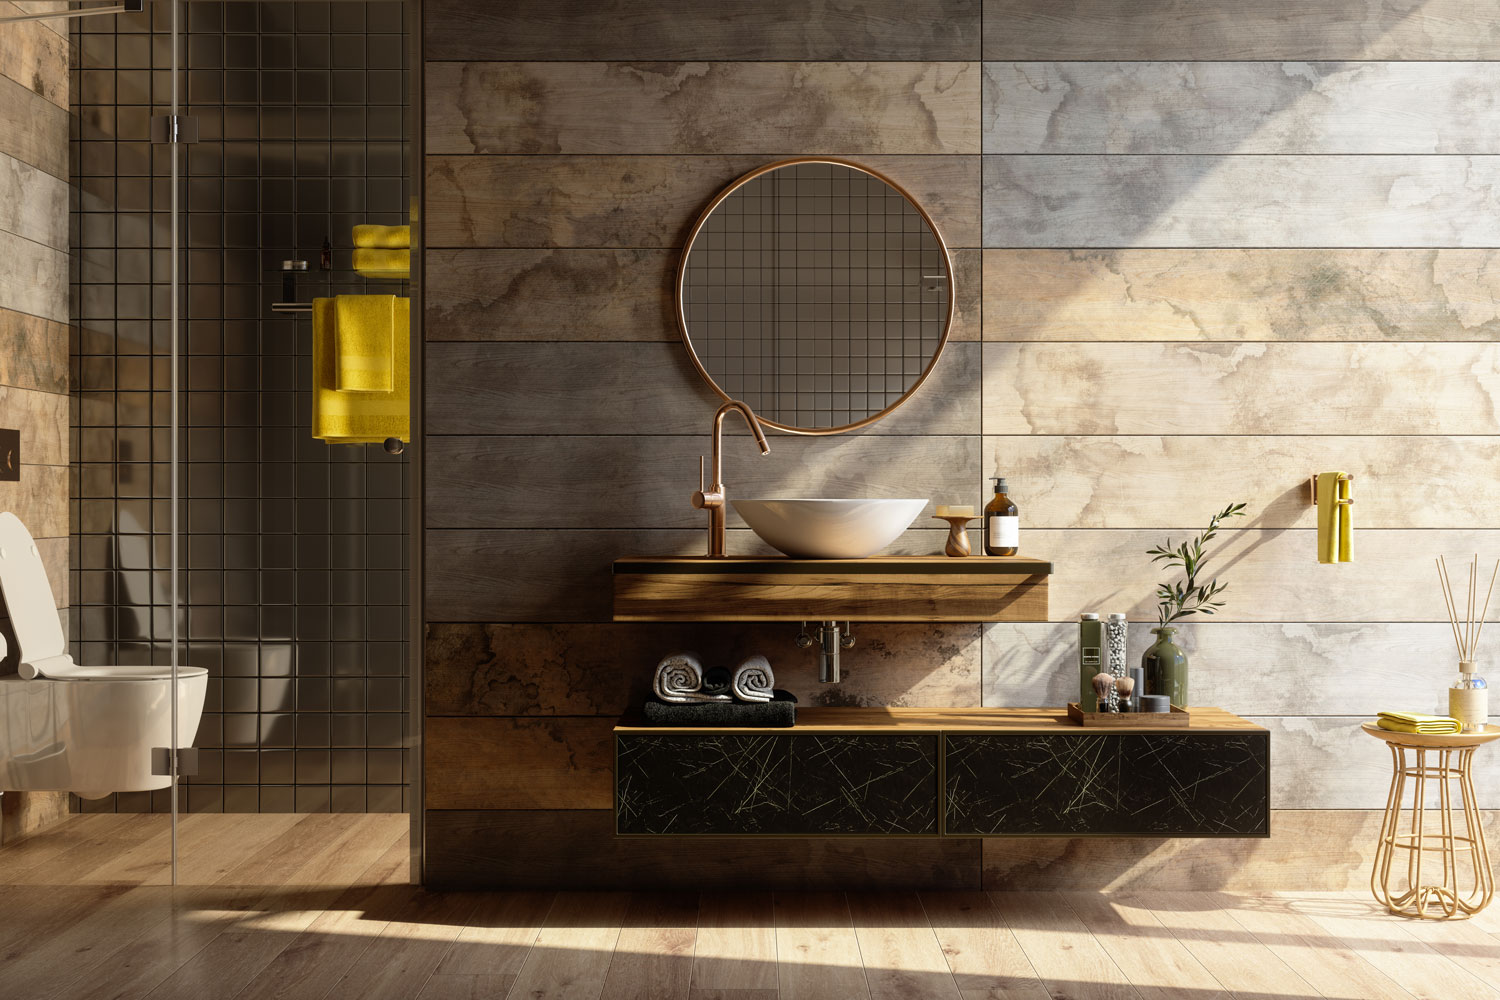 Rustic interior bathroom with brown tile cladding, round mirror and and brown tiled flooring